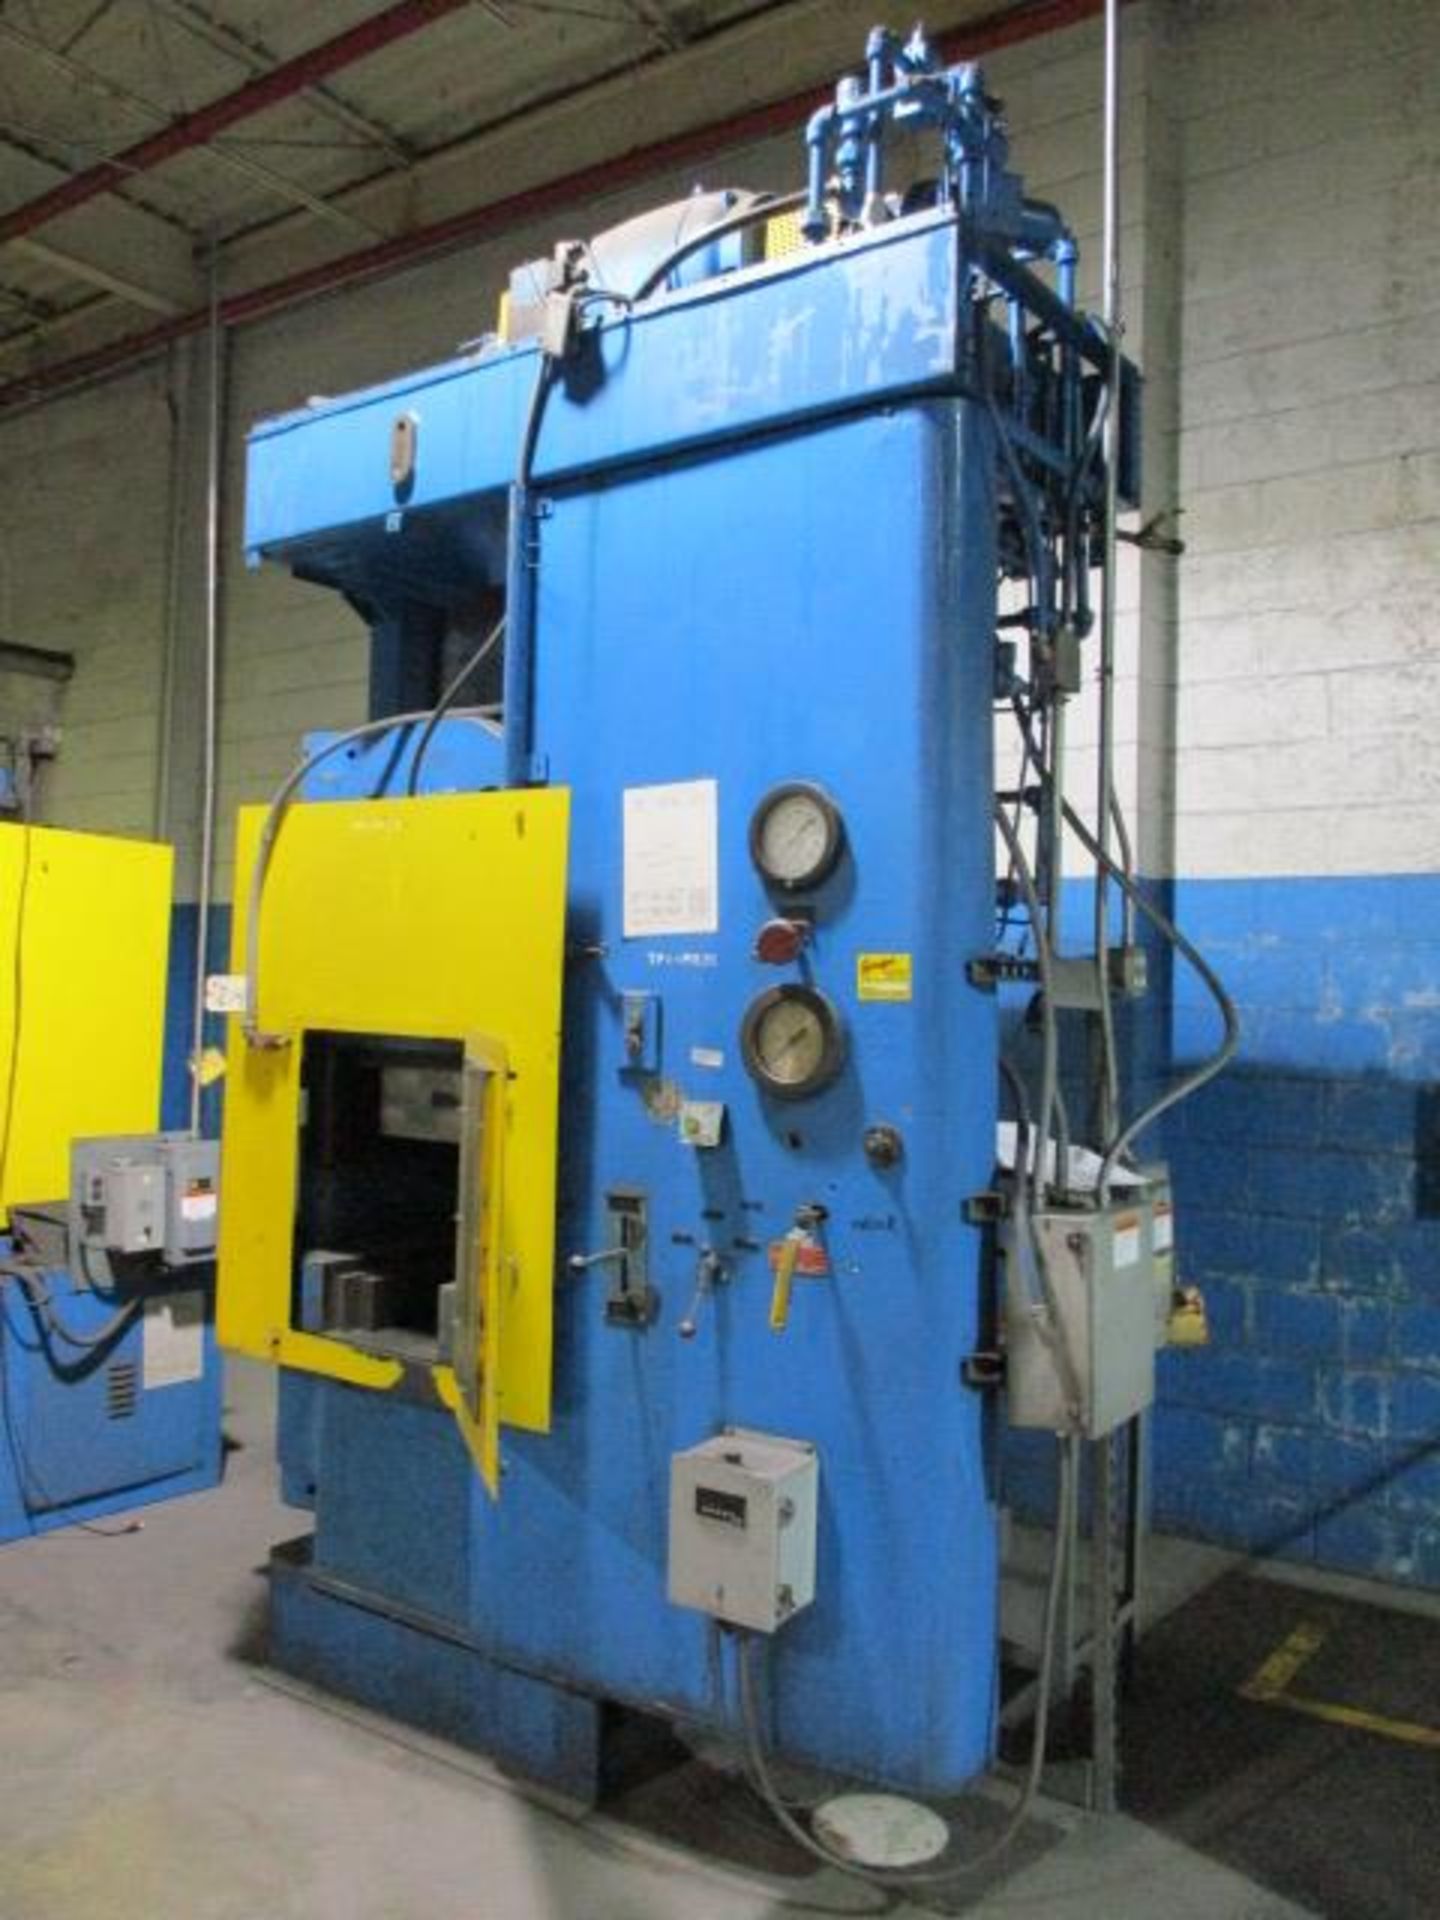 Mohr/Modern Hydraulic Corp 200 Ton IR Side Compaction Press - Image 4 of 7